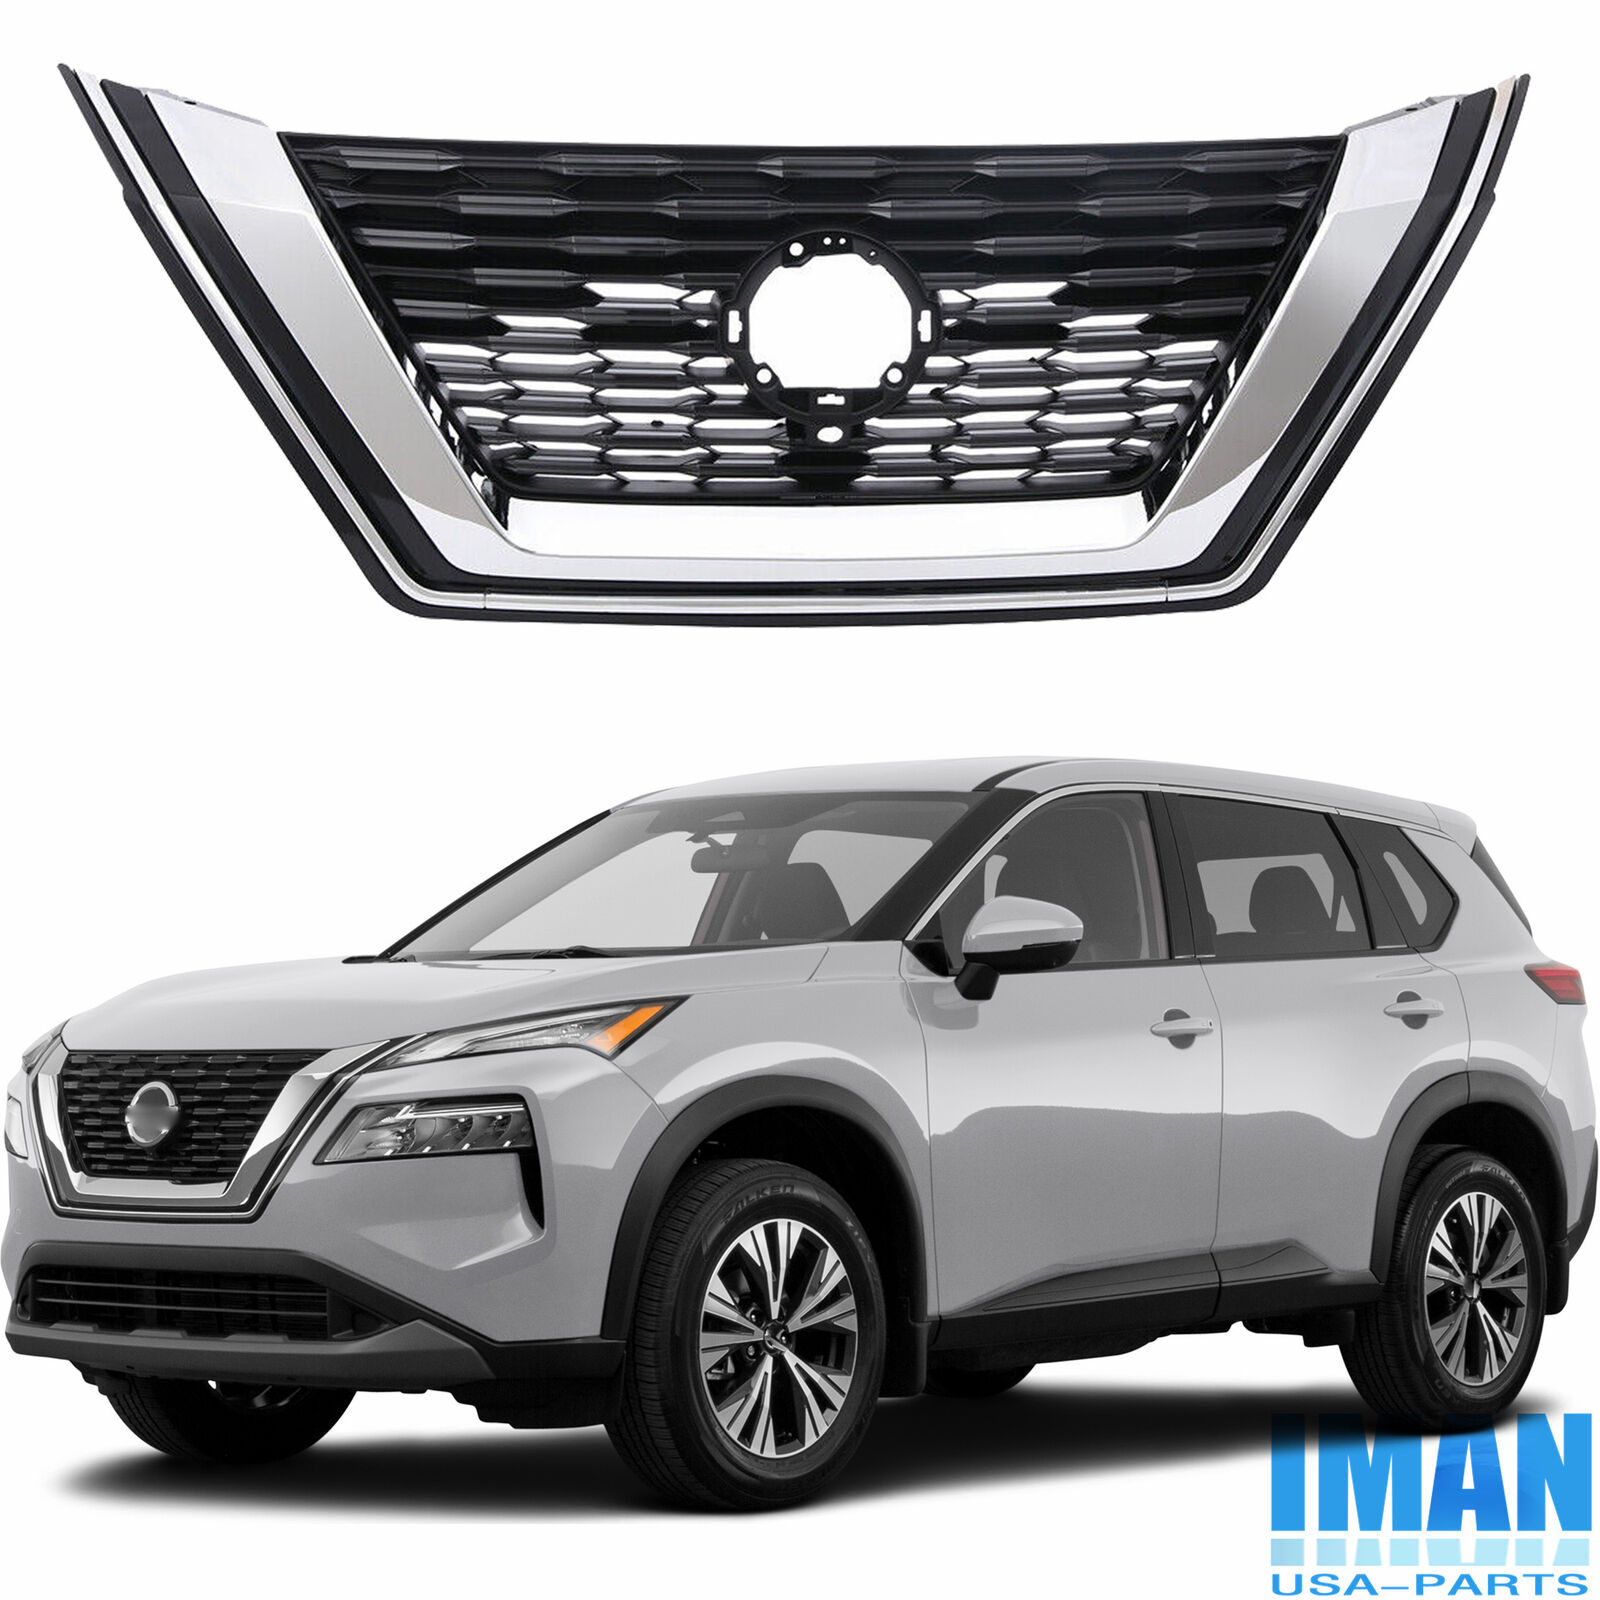 Chrome and Black Front Upper Grille Bumper Grill For Nissan Rogue 2021-2023